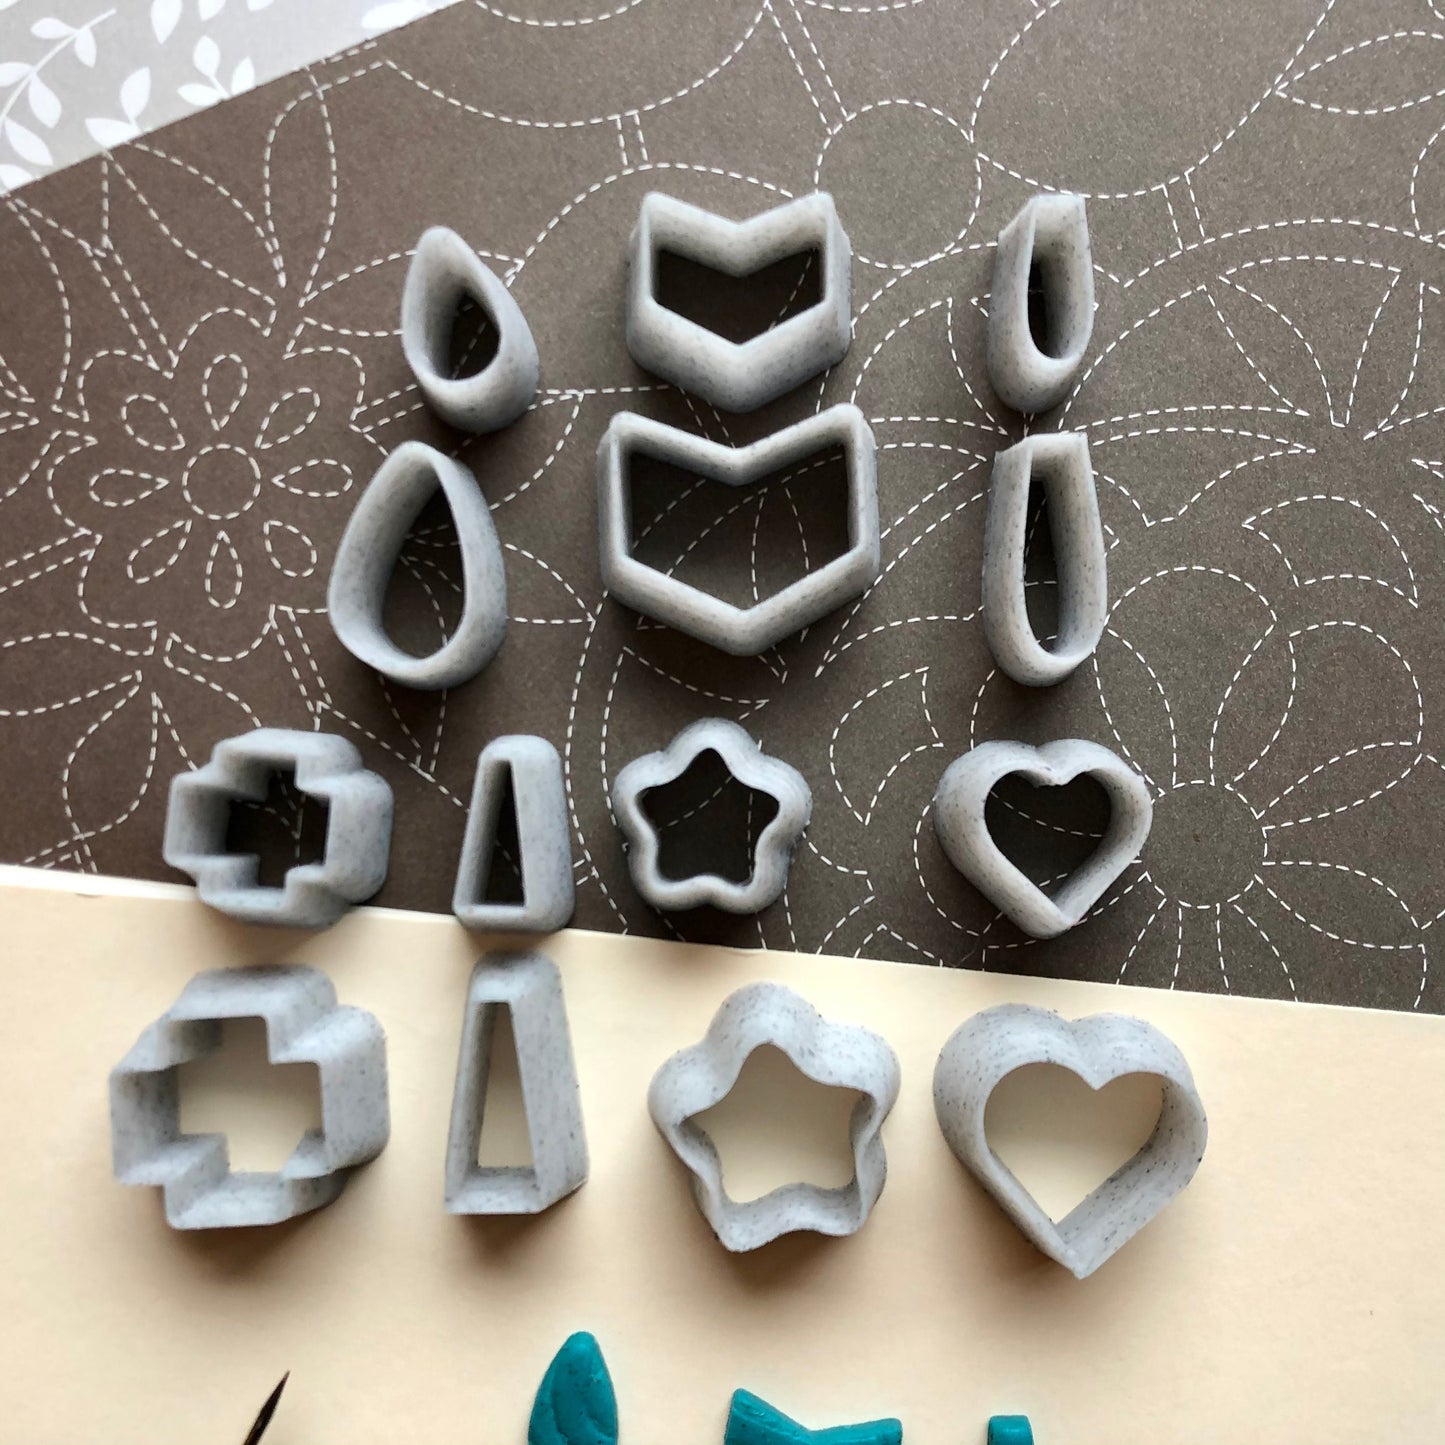 Mix and match small cutters (set 3) - made for polymer clay